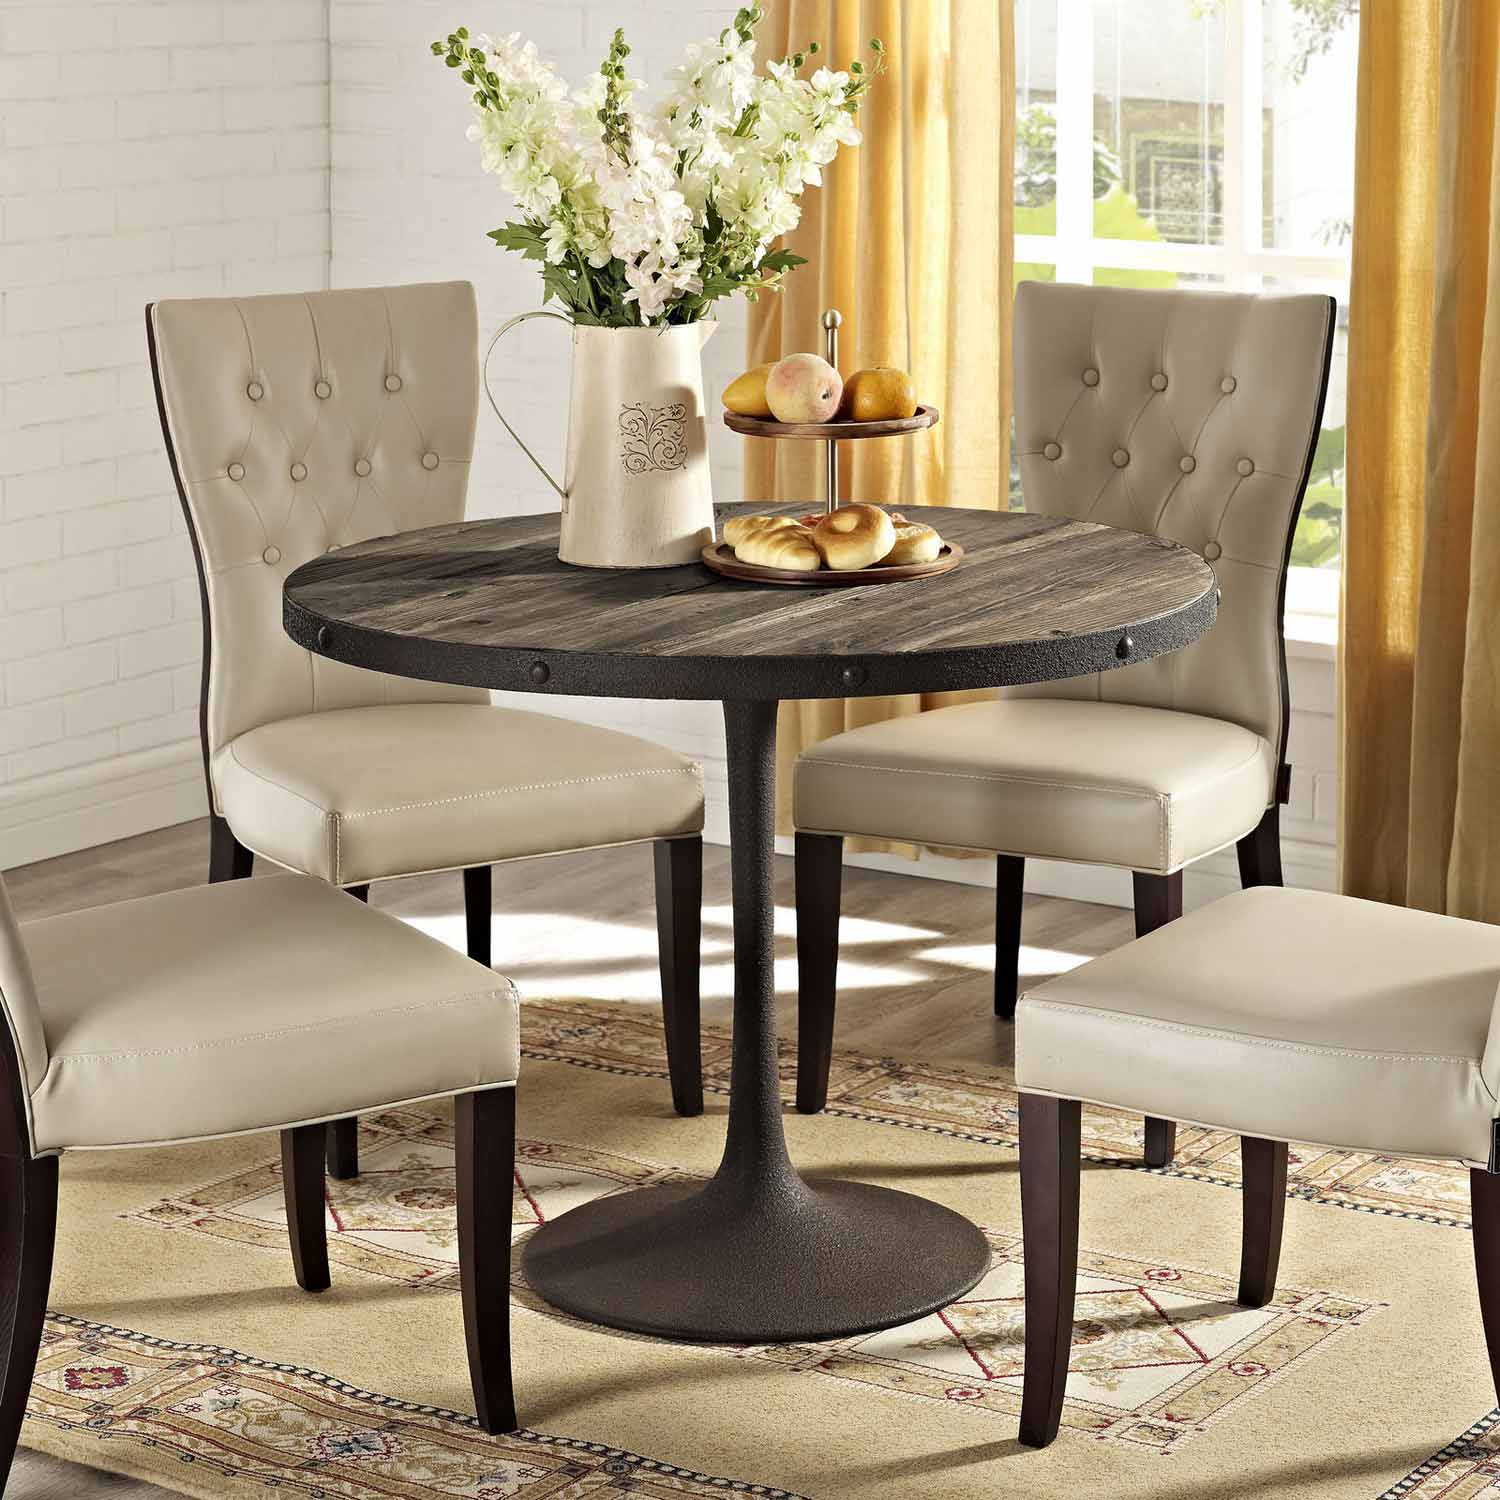 Modway Drive Wood Top Dining Table - Brown